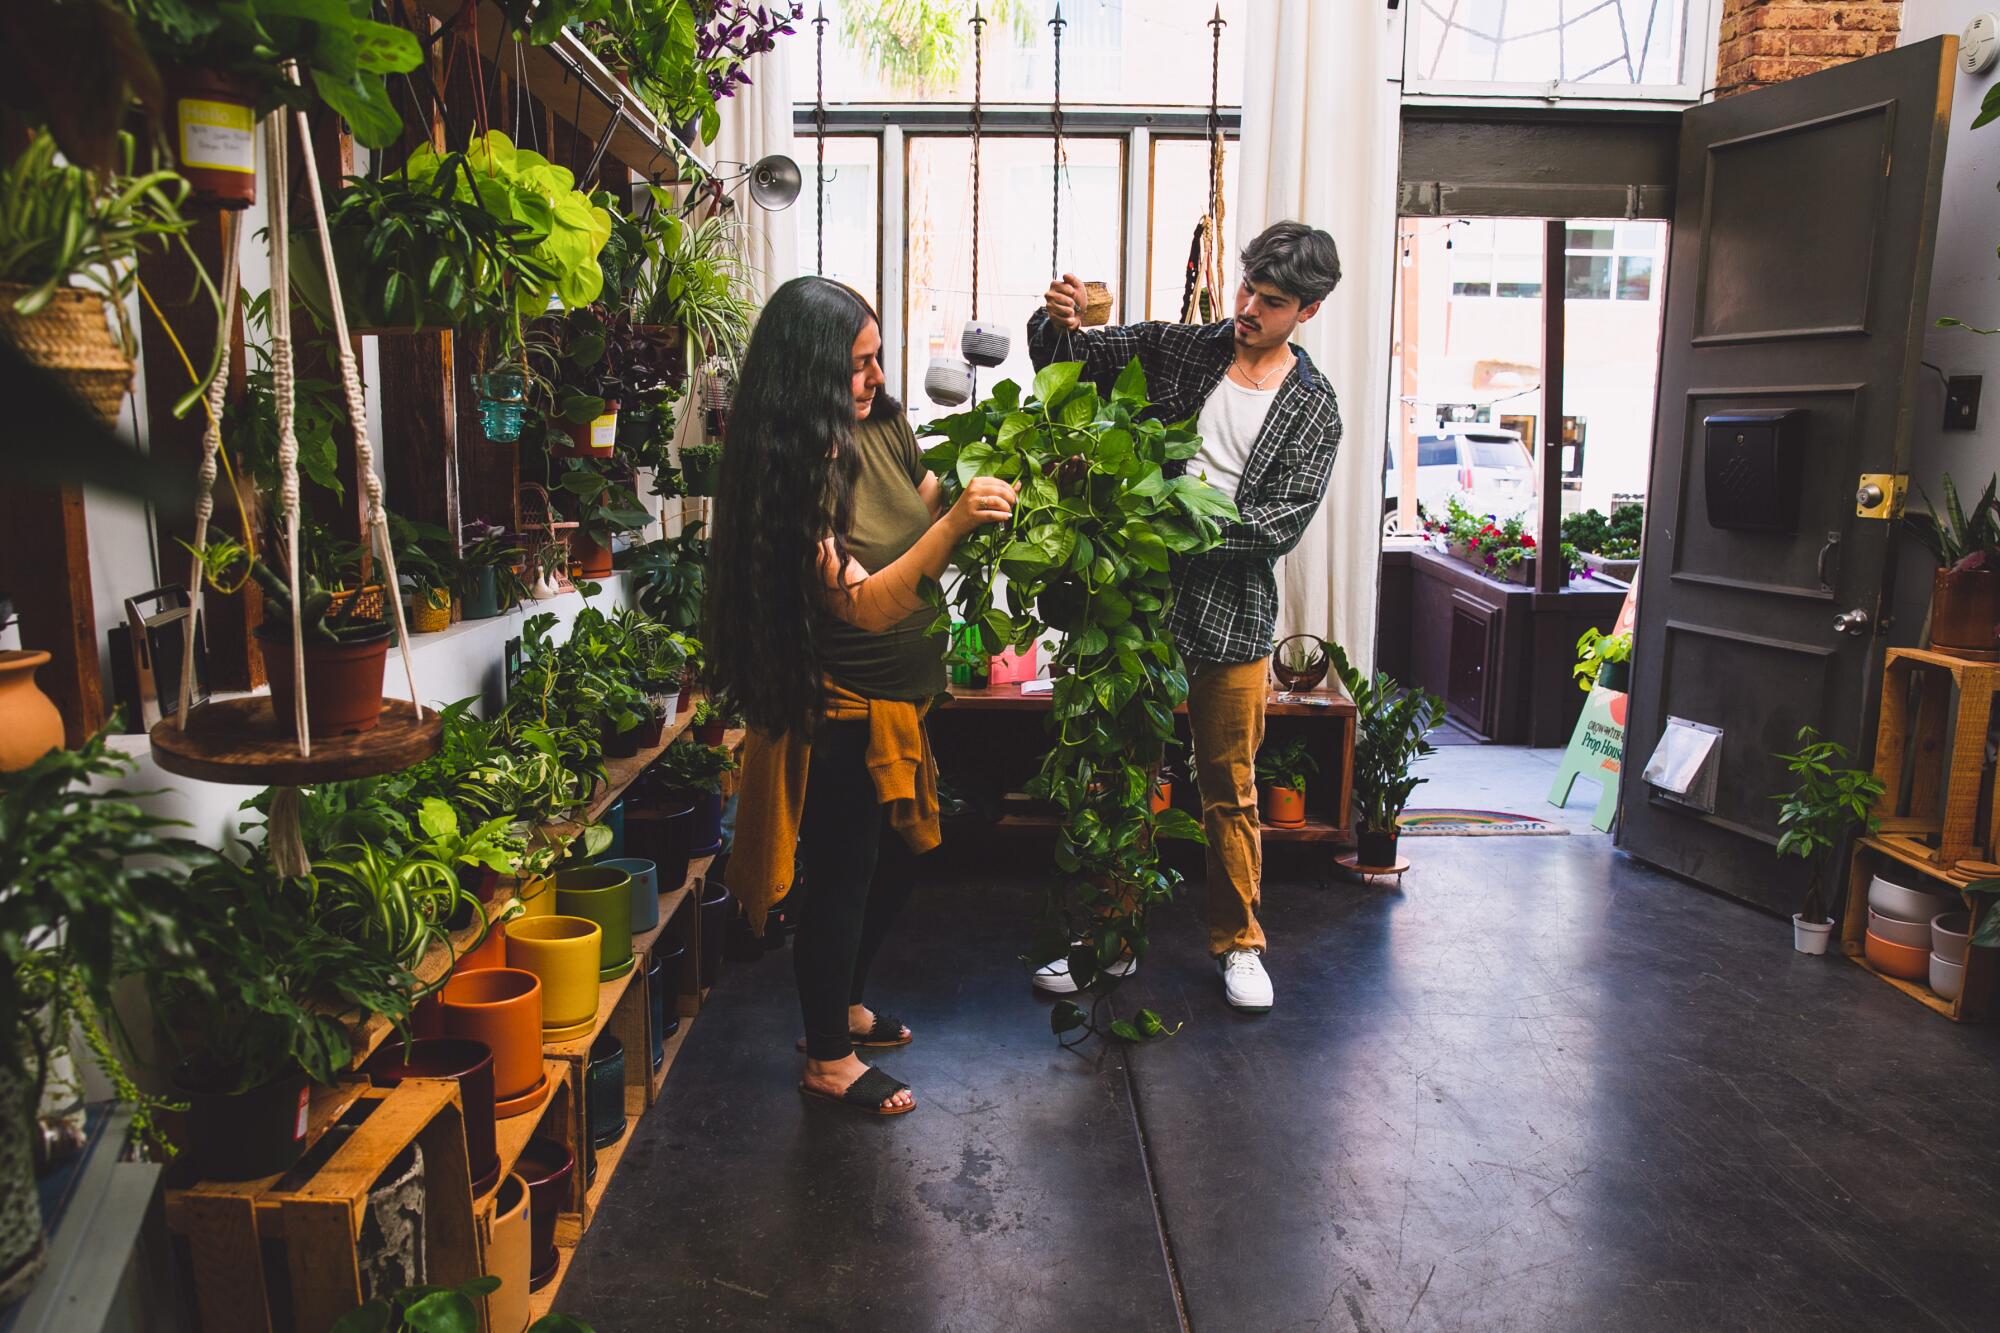 A young woman and a young man lift a plant from the ground.  They are surrounded by pots and plants on the shelves.